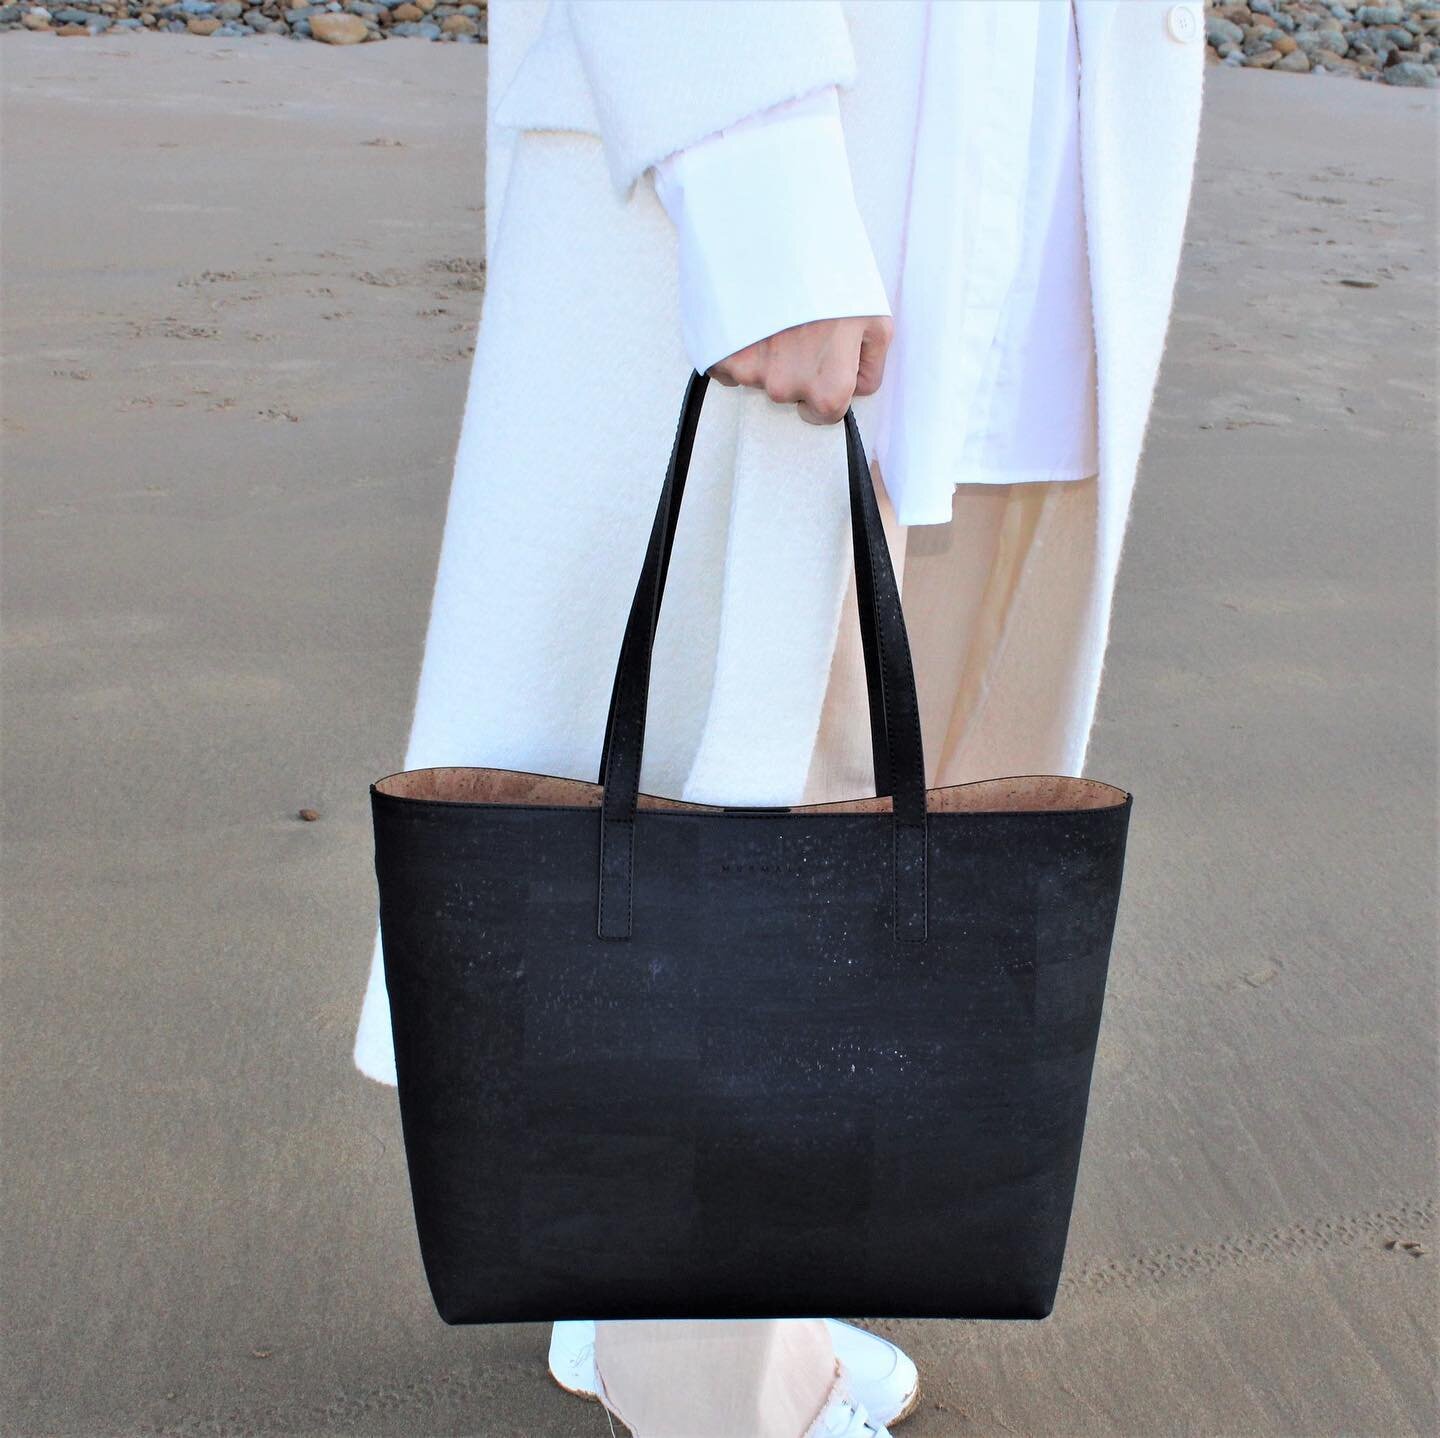 MURMALI's ZETA TOTE BAG in BLACK. Inspired by Nature. Also available in beautiful NATURAL colors. PETA-Approved Vegan.

#earthfriendlyfashion

&bull; Link to Nature &bull; Stay tuned to @murmali_official for more info.
.
.
.
.
.
.
.
.
.
Cruelty-Free,